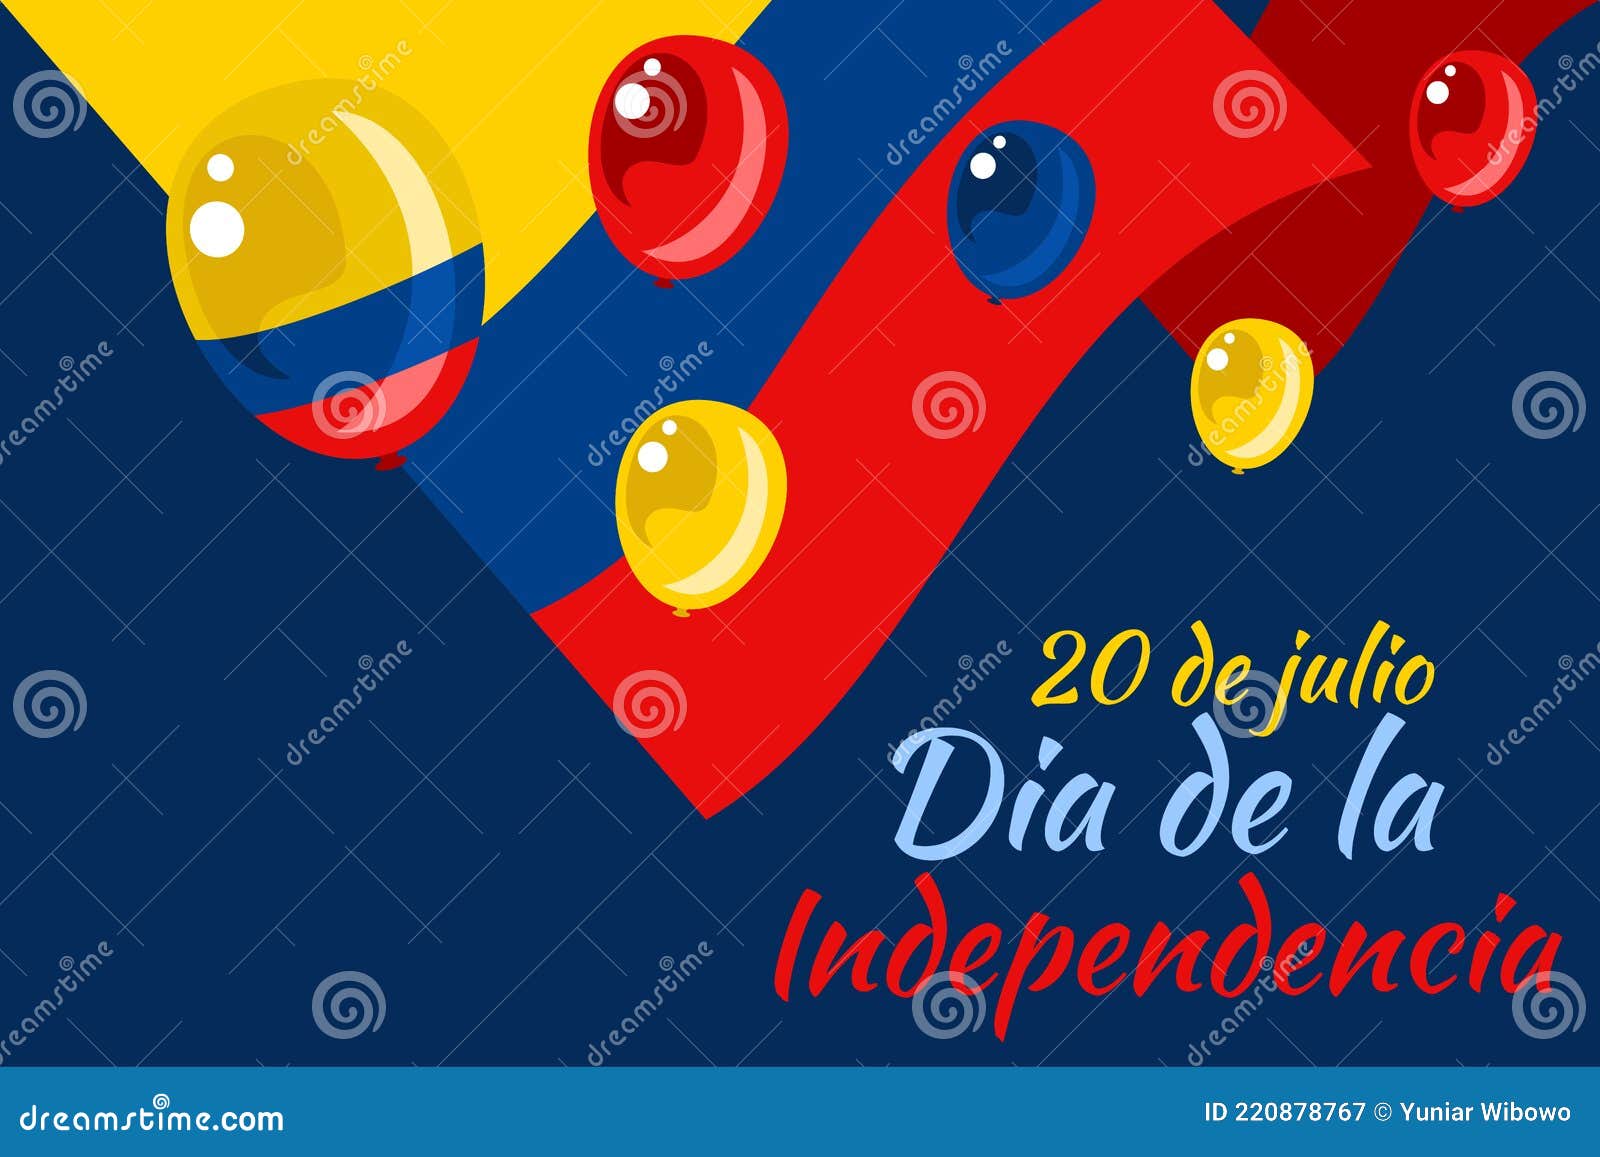 translate: july 20, independence day dia de la independencia of colombia